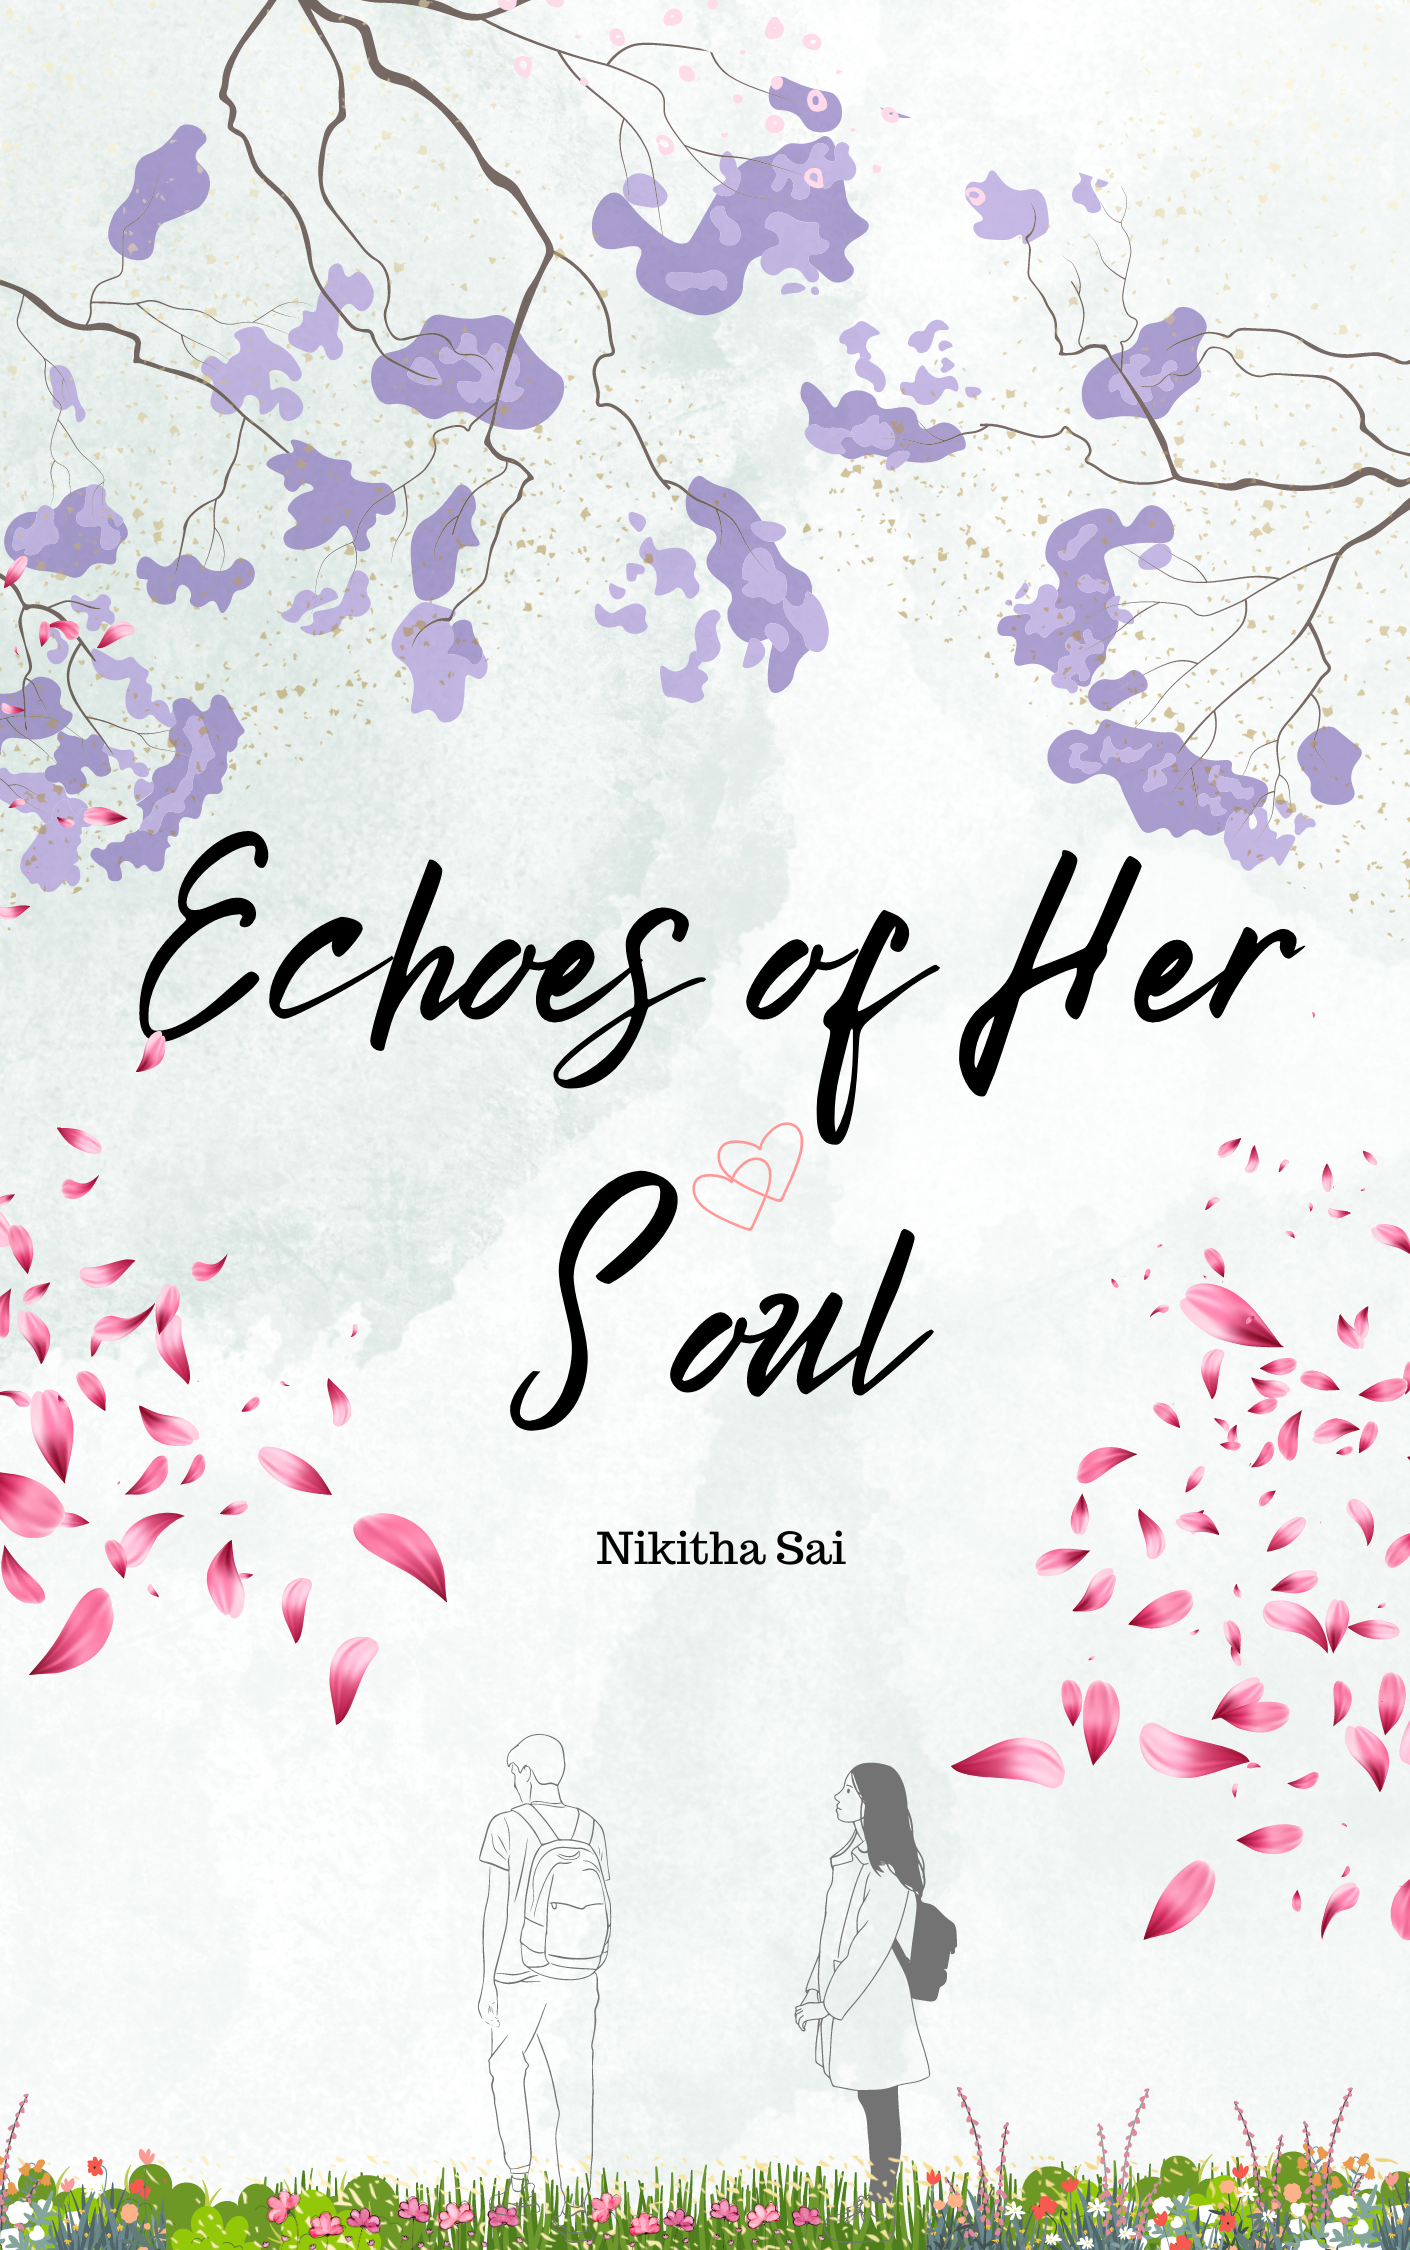 [original size] echoes of her soul